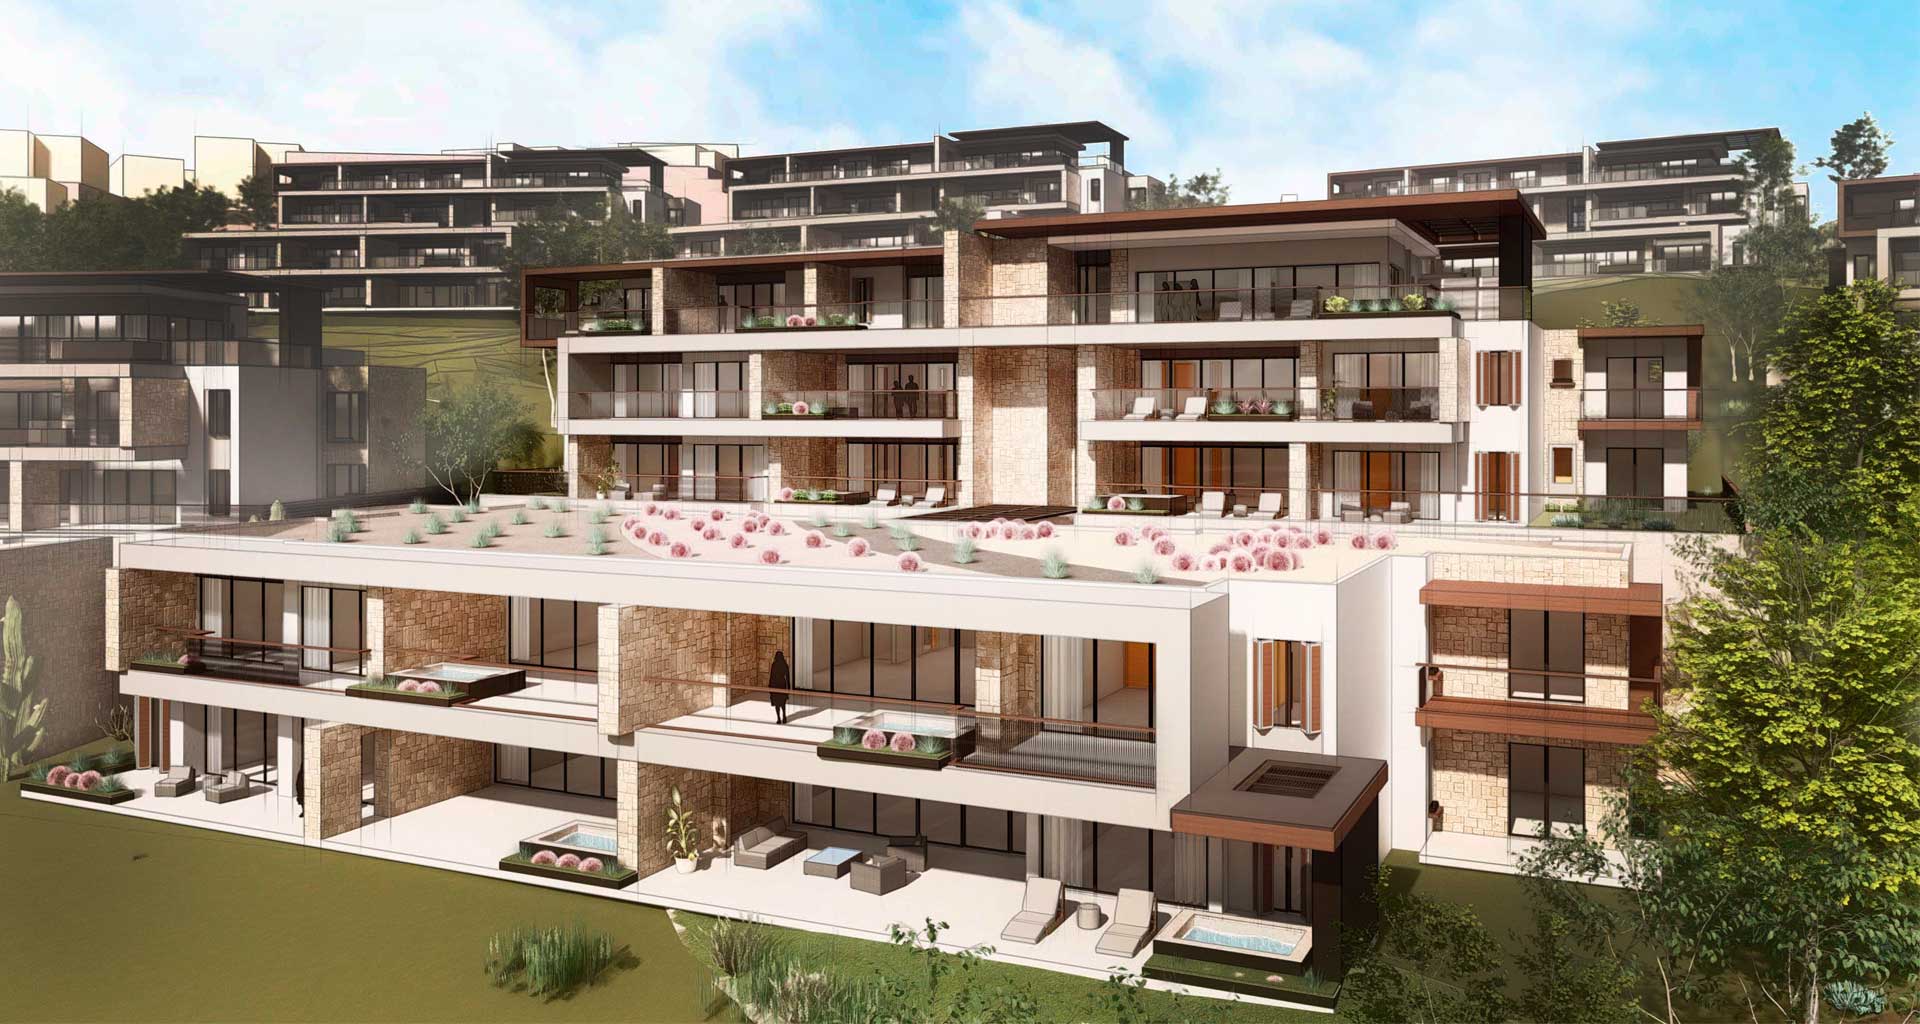 Newest Luxury Community Delivers First Residences at Quivira Los Cabos